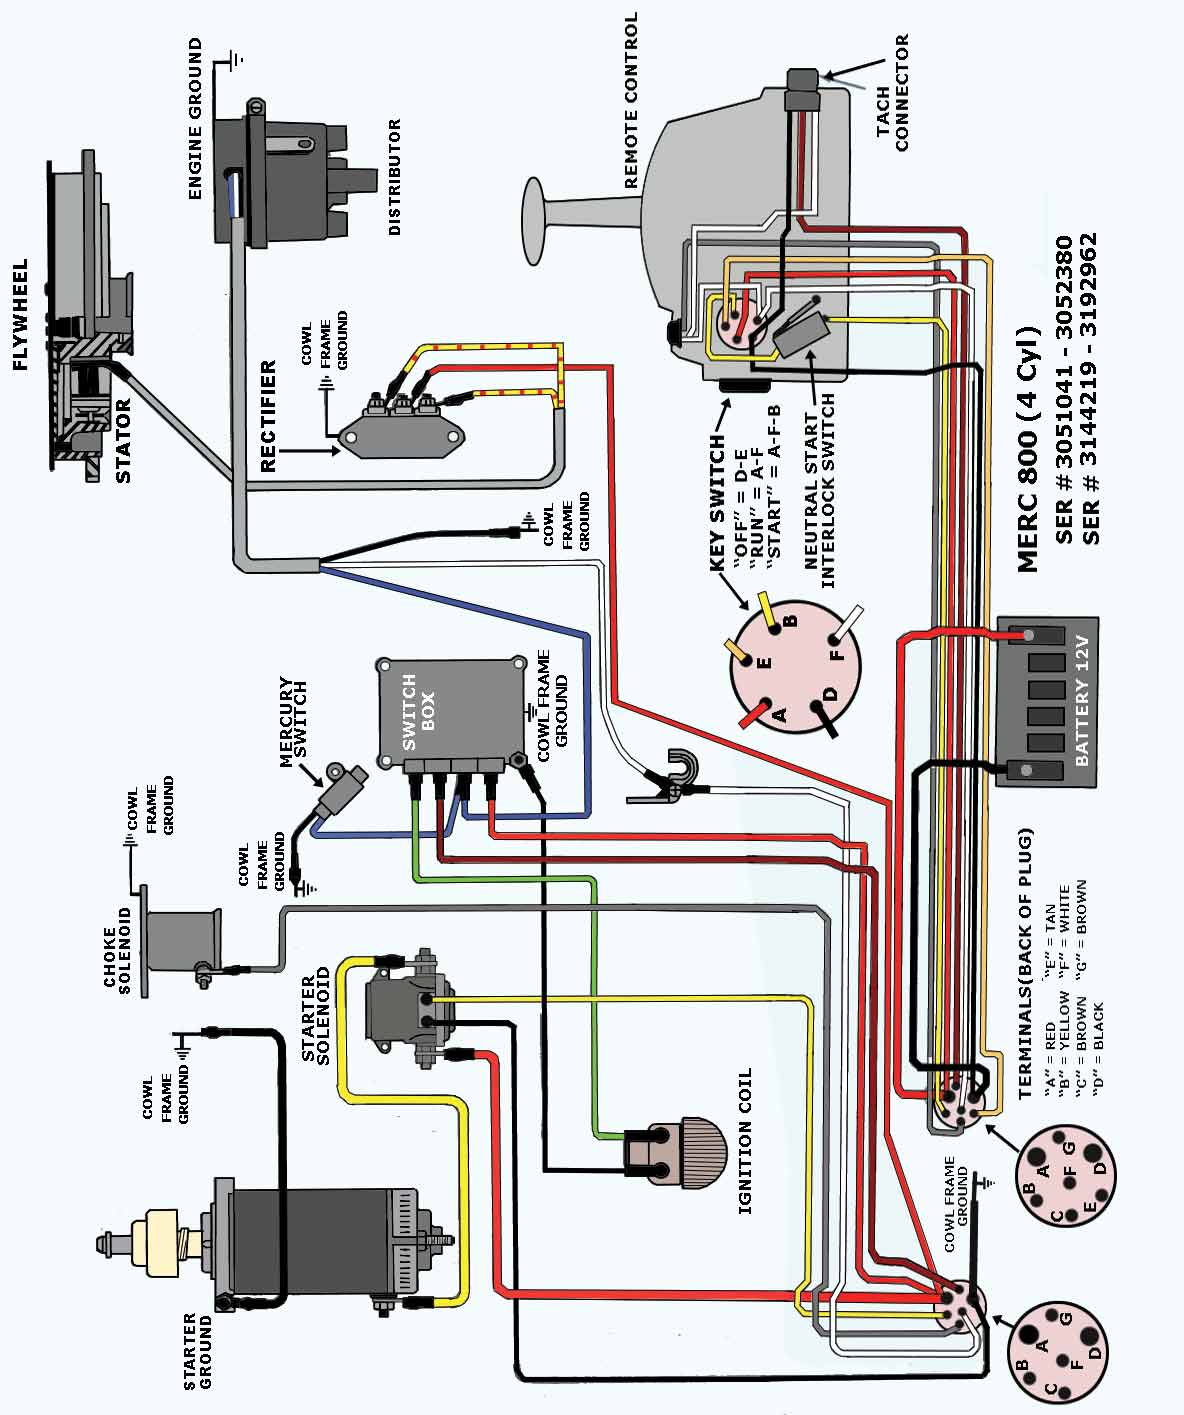 1998 Mercury Outboard Wiring Diagram Free Picture